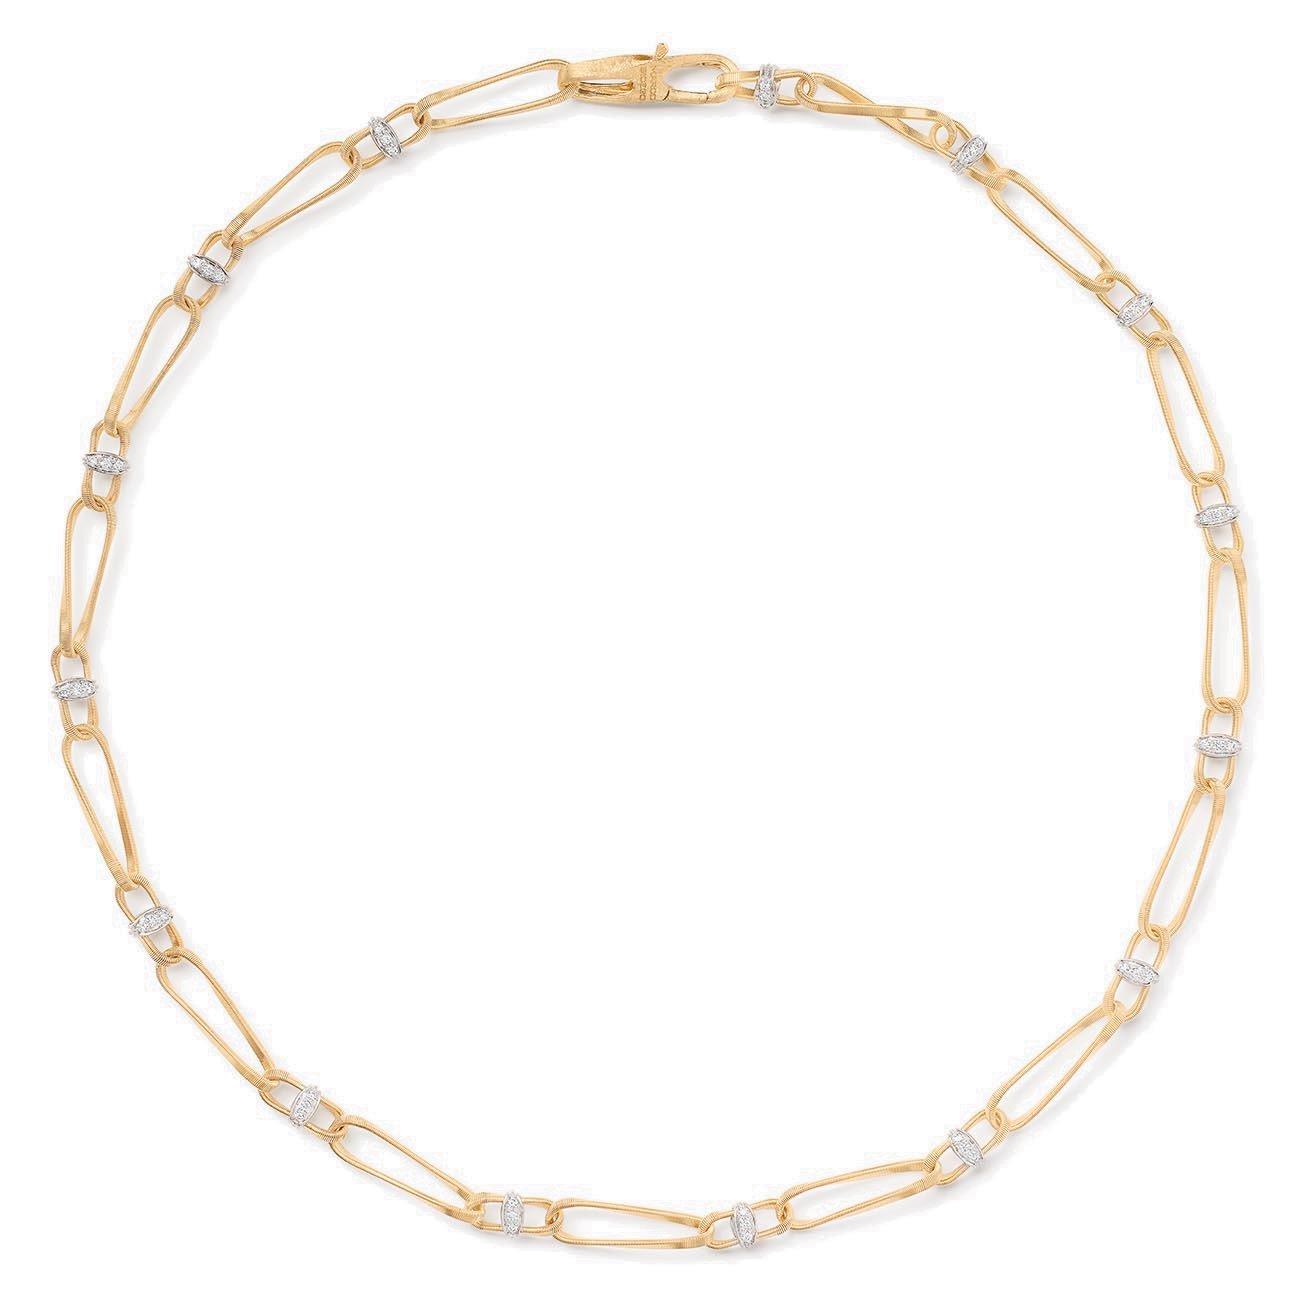 Marco Bicego Marrakech Onde Twisted Coil Link Necklace with Diamonds, 18 Inches